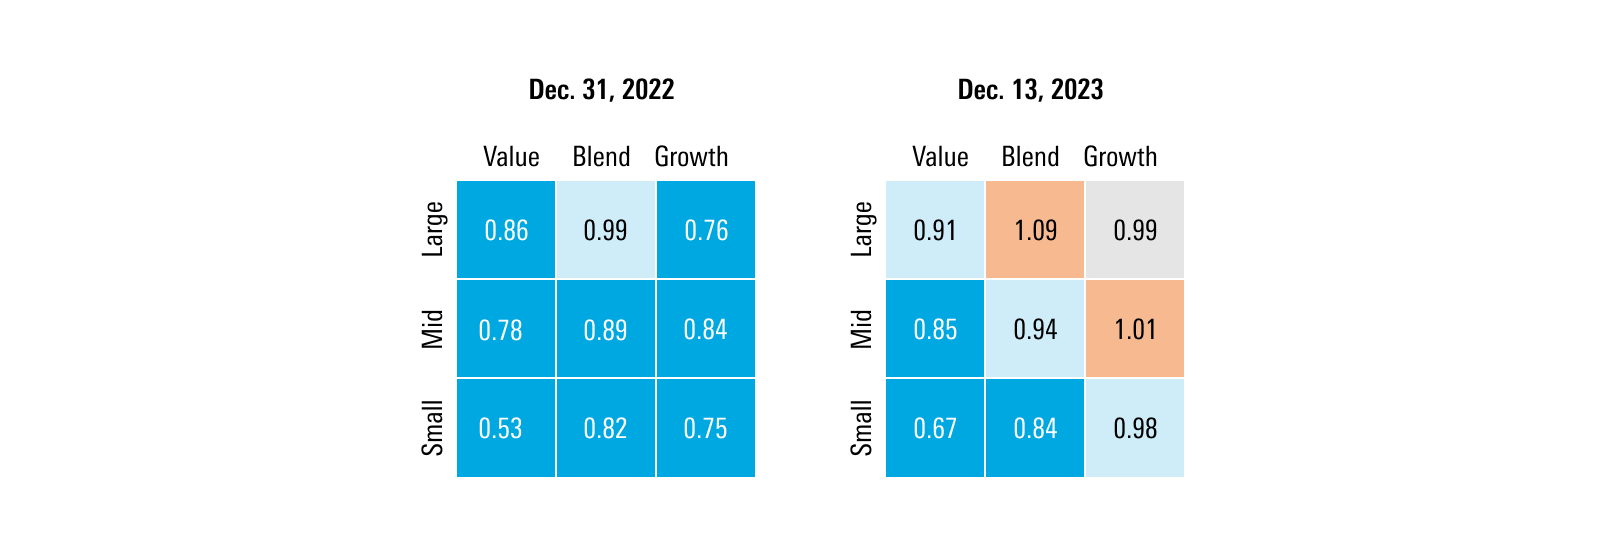 Morningstar style box comparison of valuations for year end 2022 and 2023